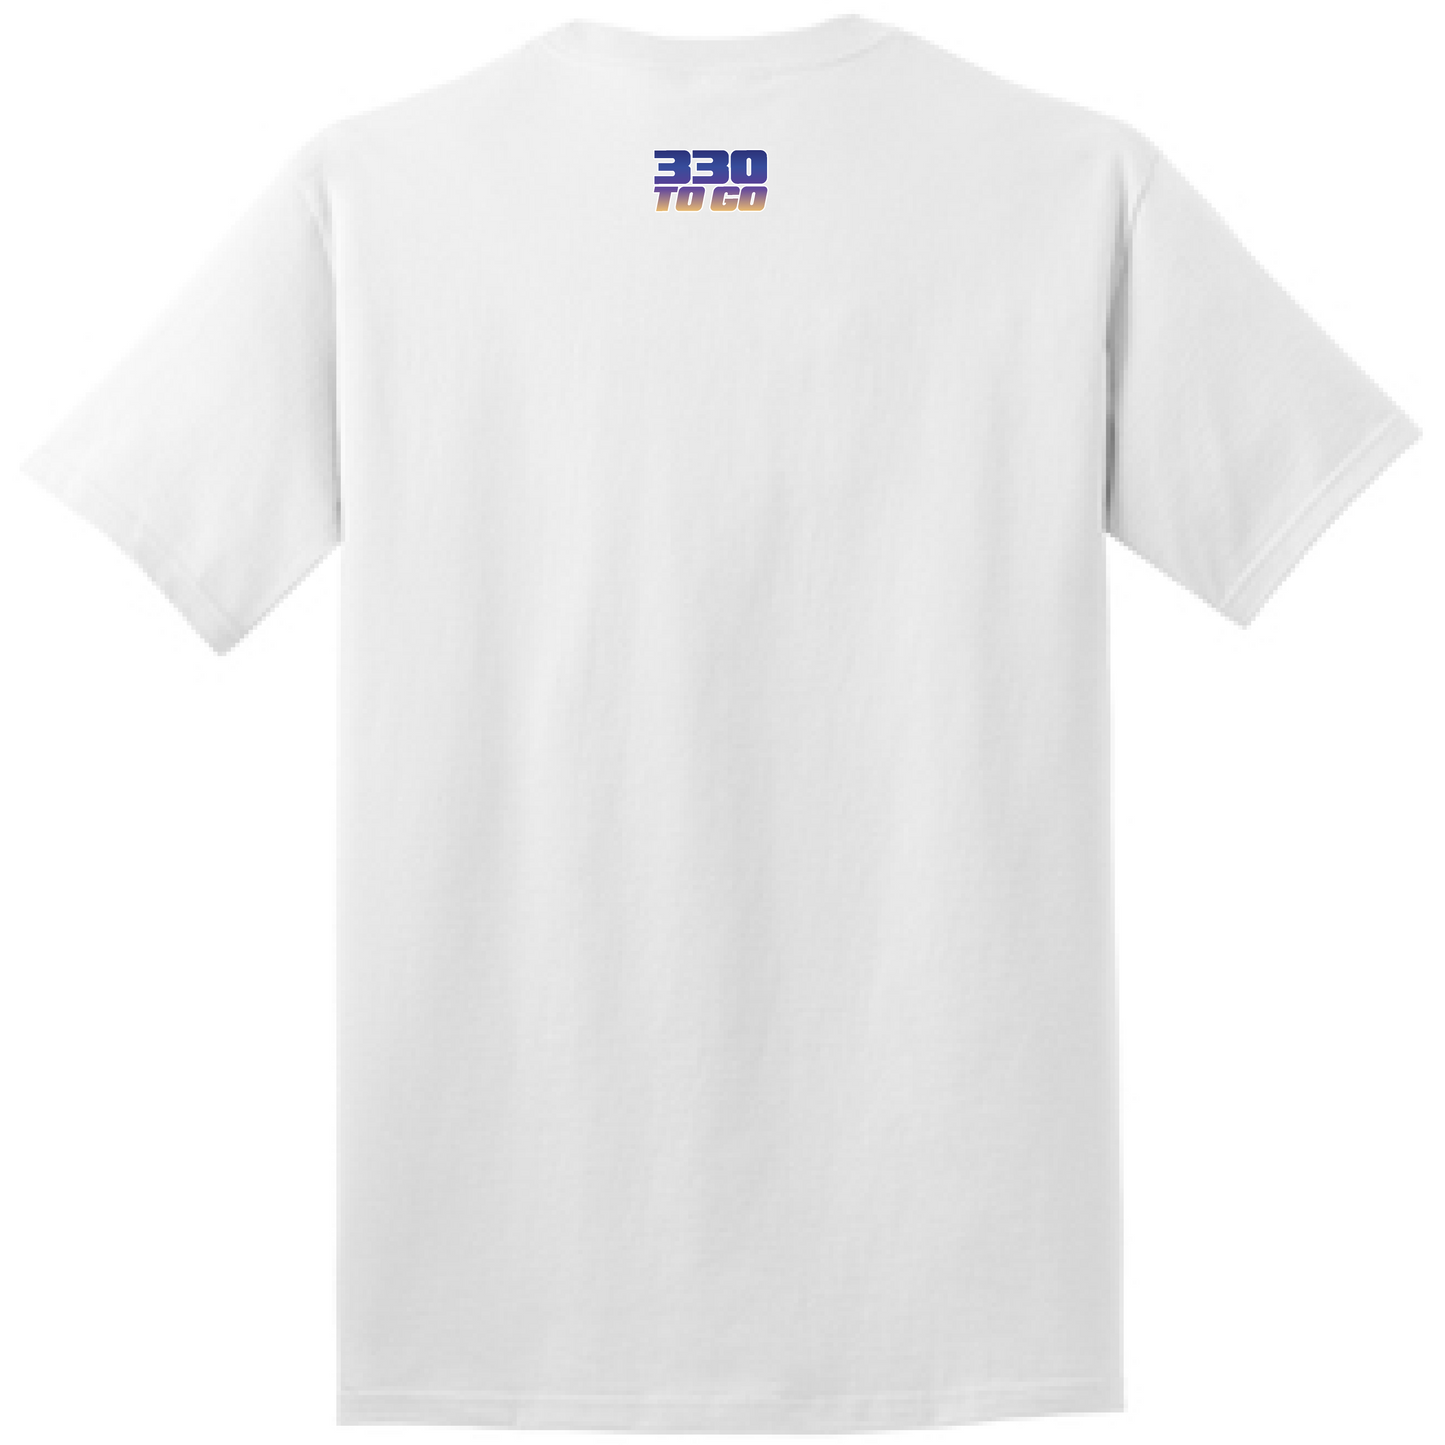 Just here for the comments tee